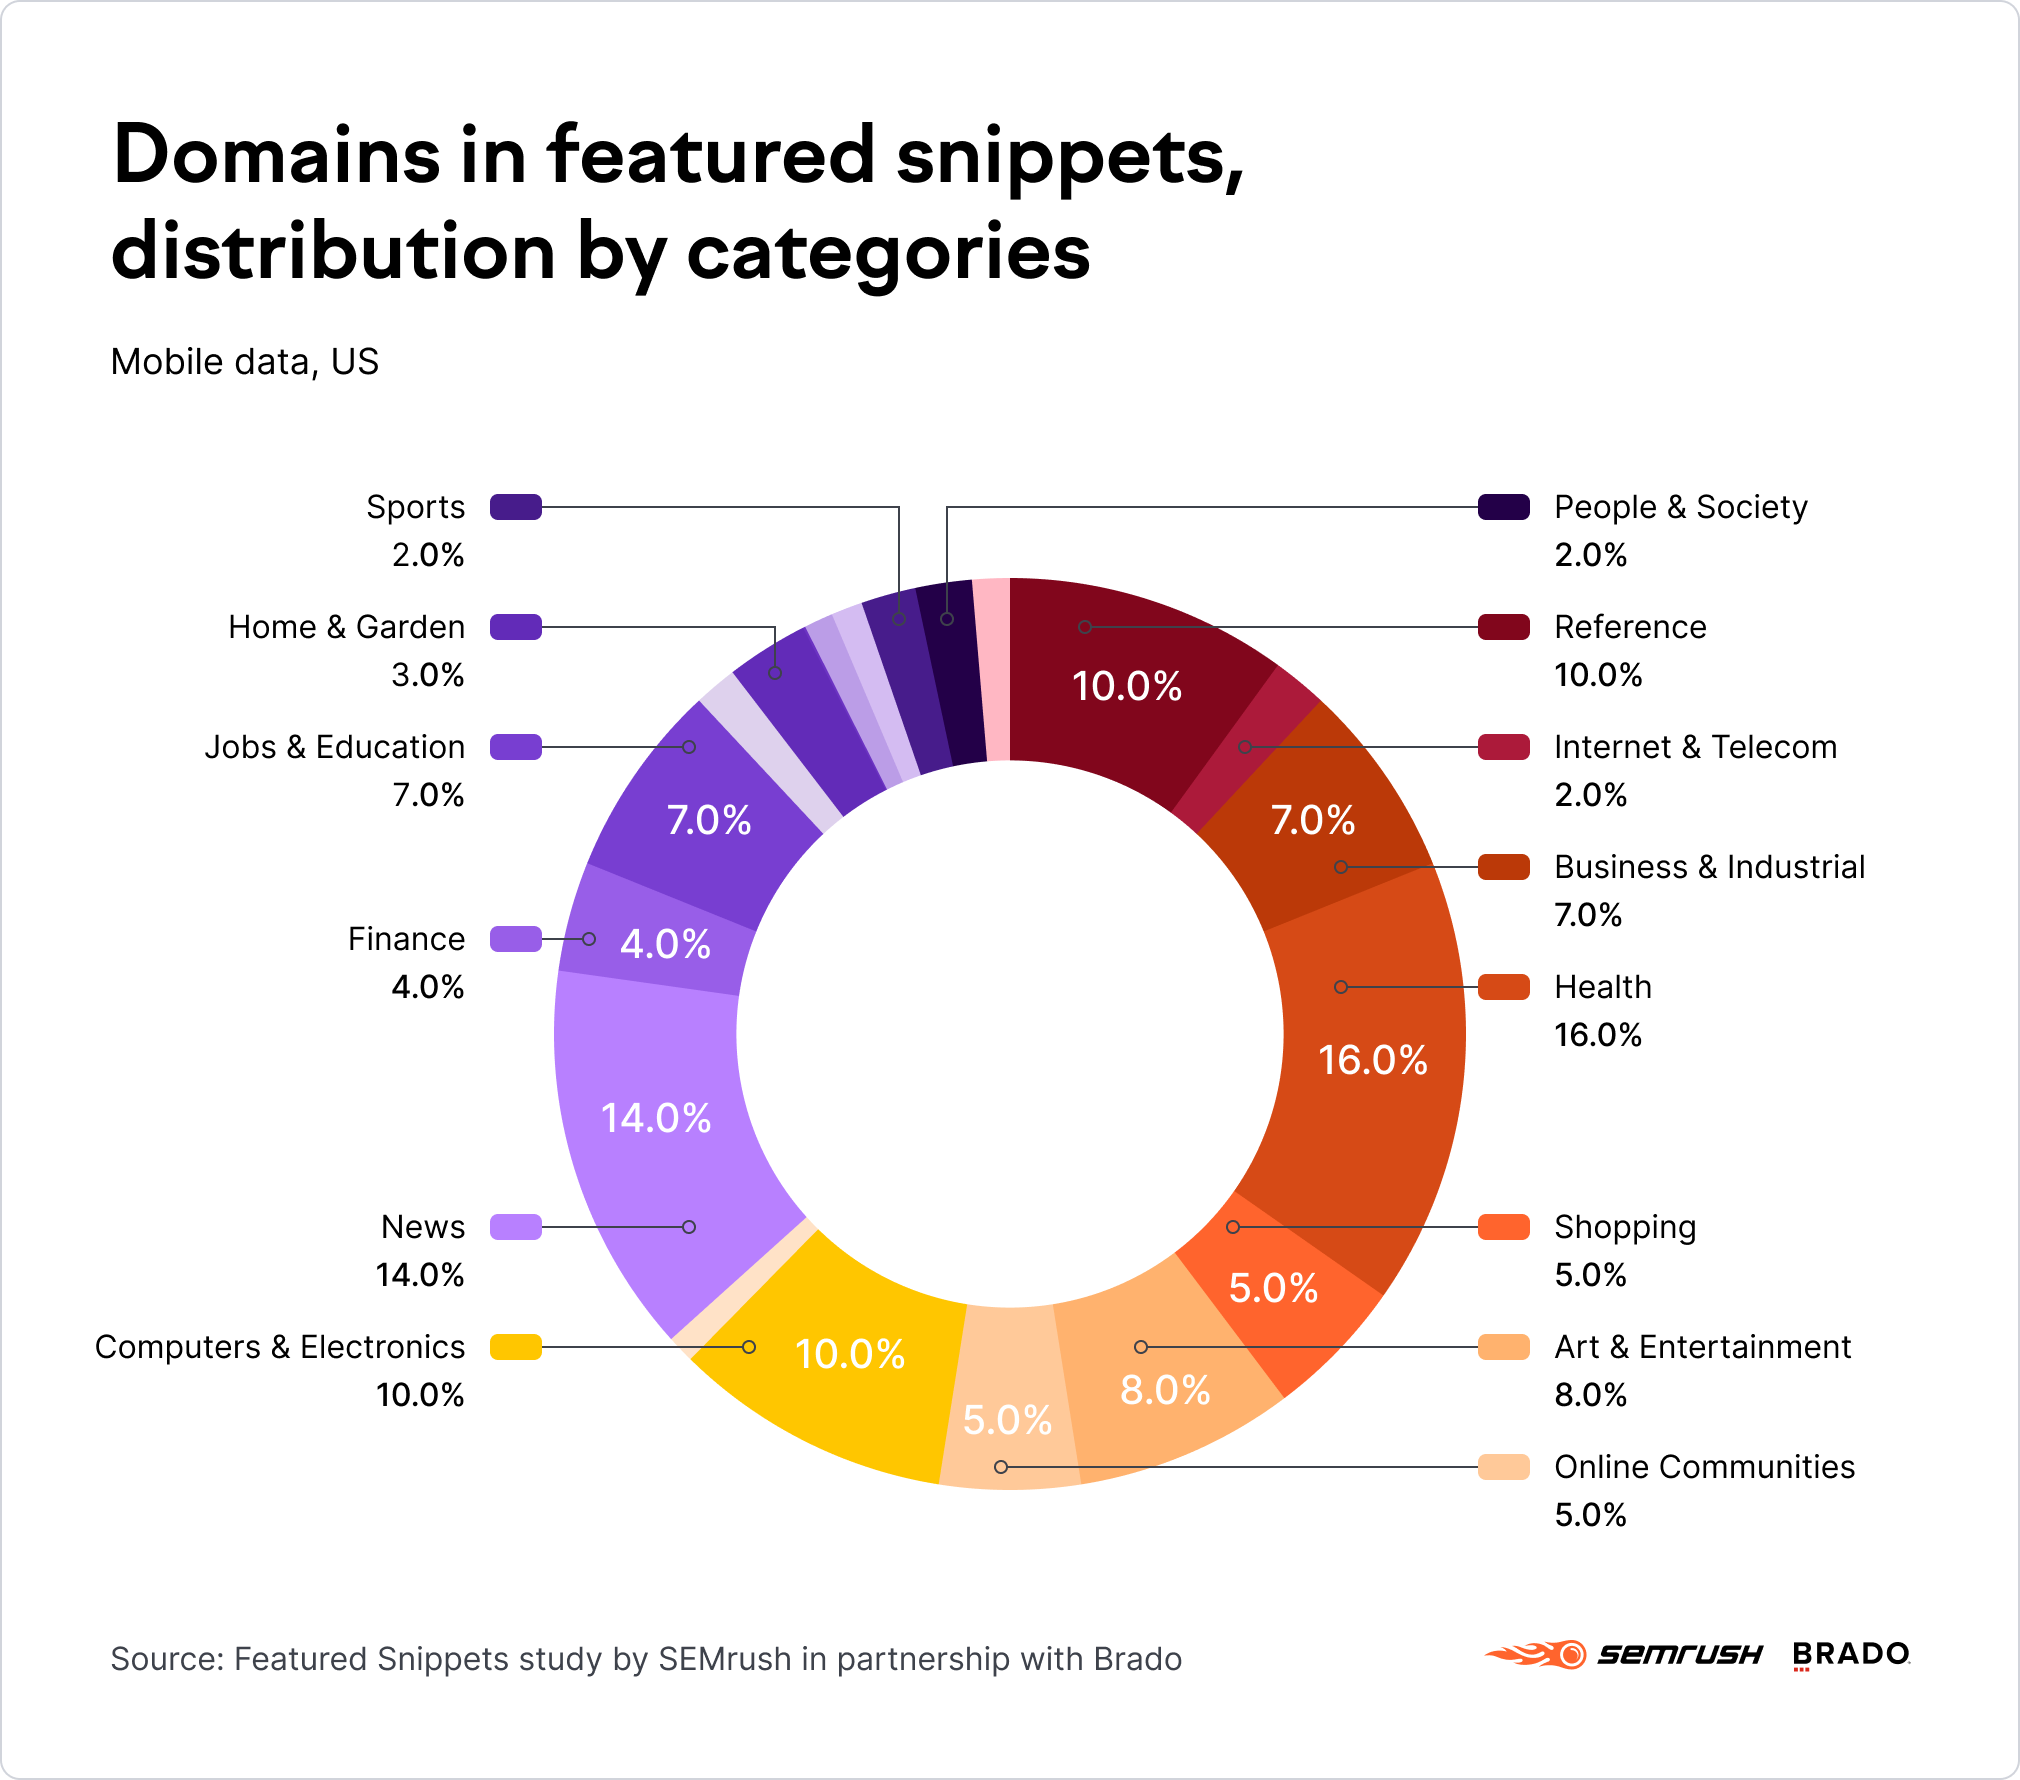 Domains in featured snippets, distribution by categories